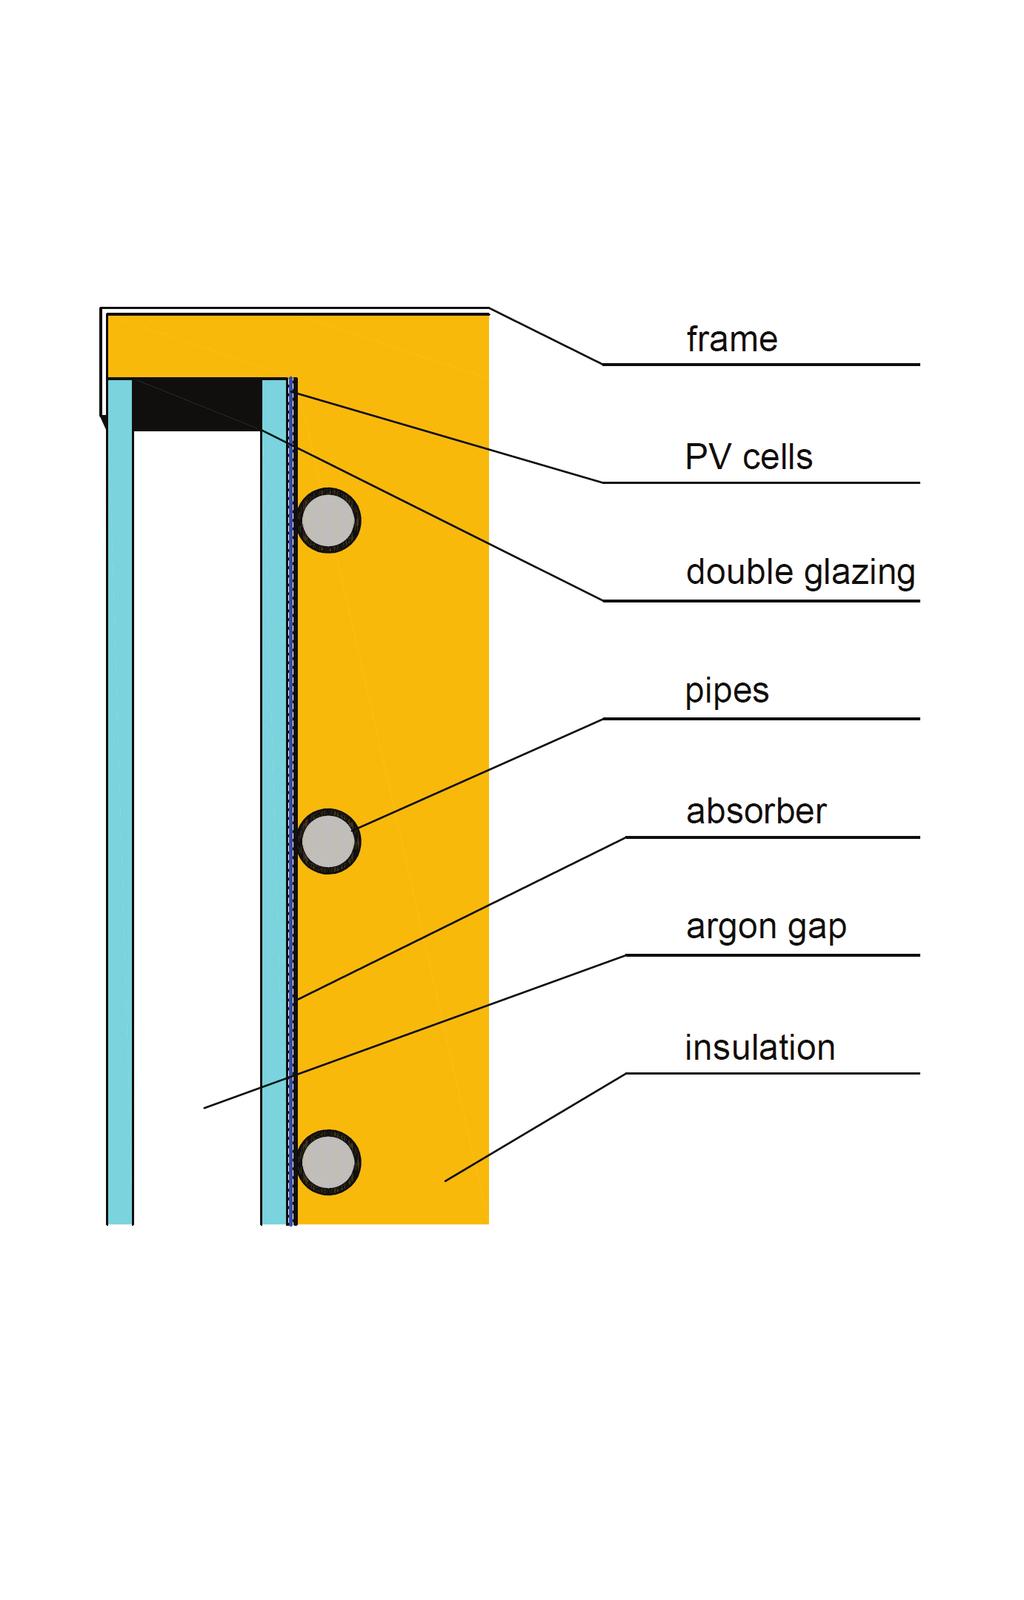 The PV part of the collector has 60 cells at size 125 x 125 mm in three parallel strings. The PV cell nominal efficiency is 17 % under STC (standard test conditions, i. e. reference temperature 25 C and solar irradiance 1000 W/m 2 ).